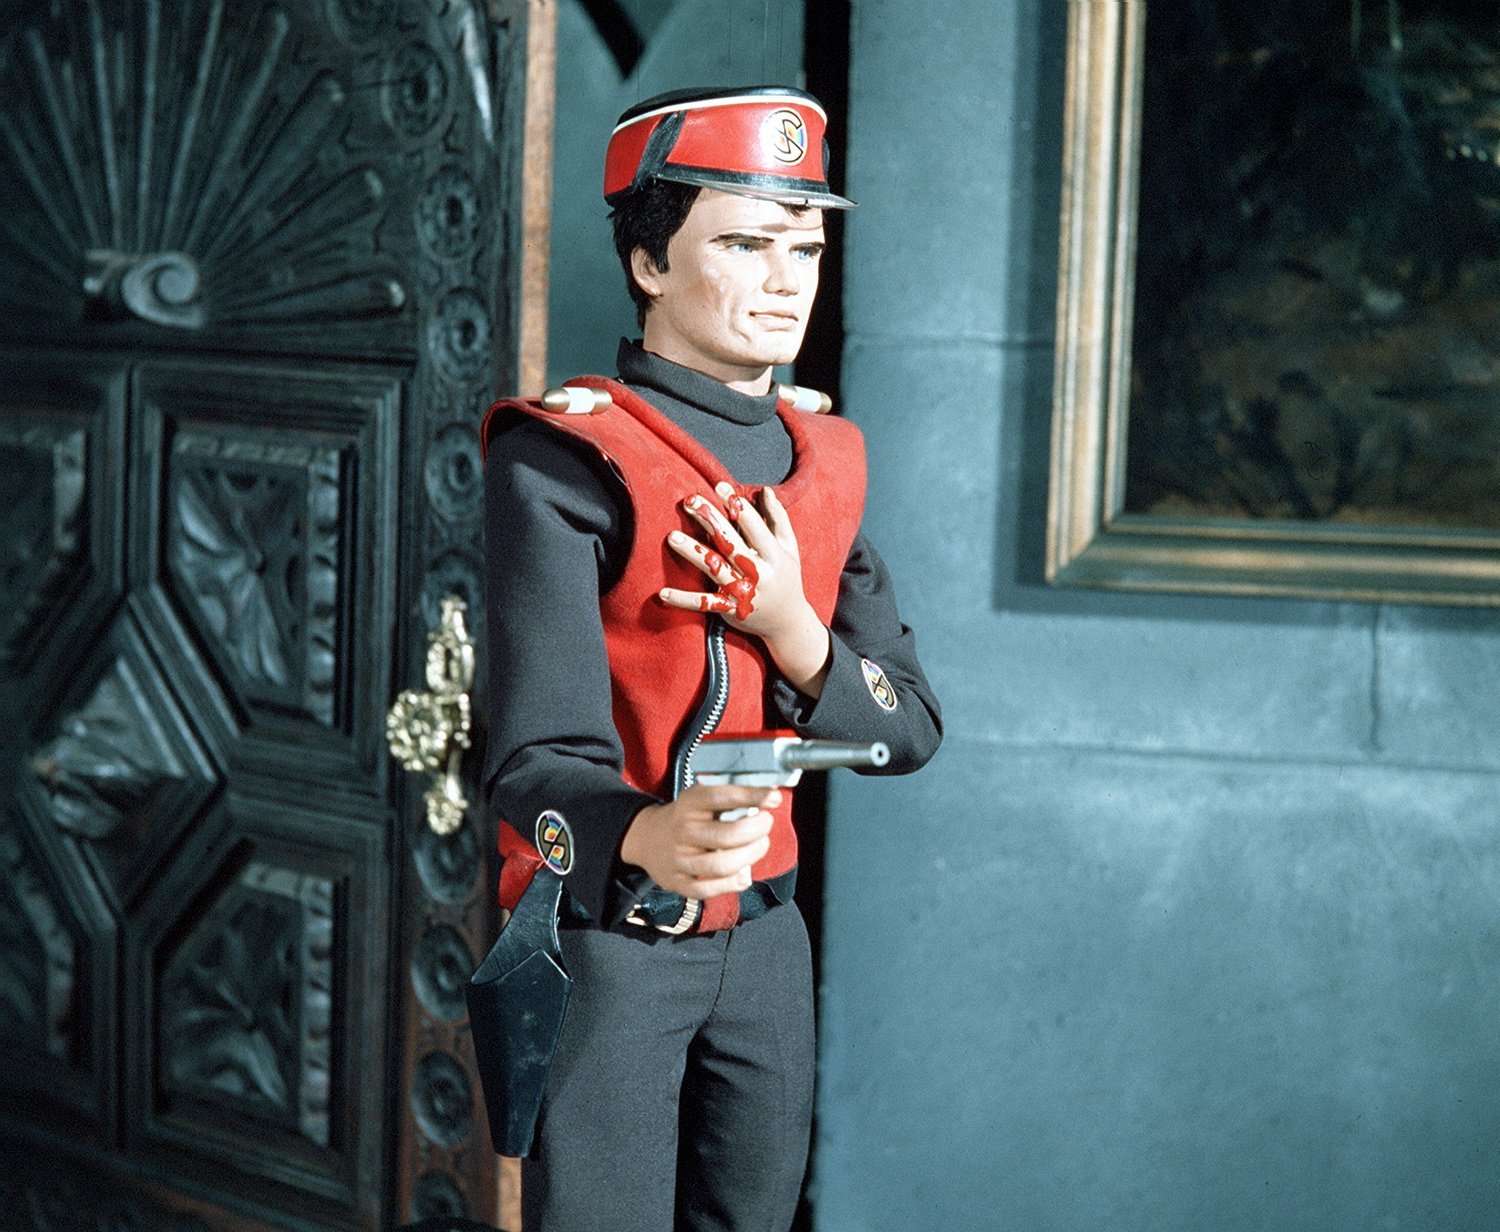 Happy Captain Scarlet Day! An Insider's Guide - The Gerry Anderson Store